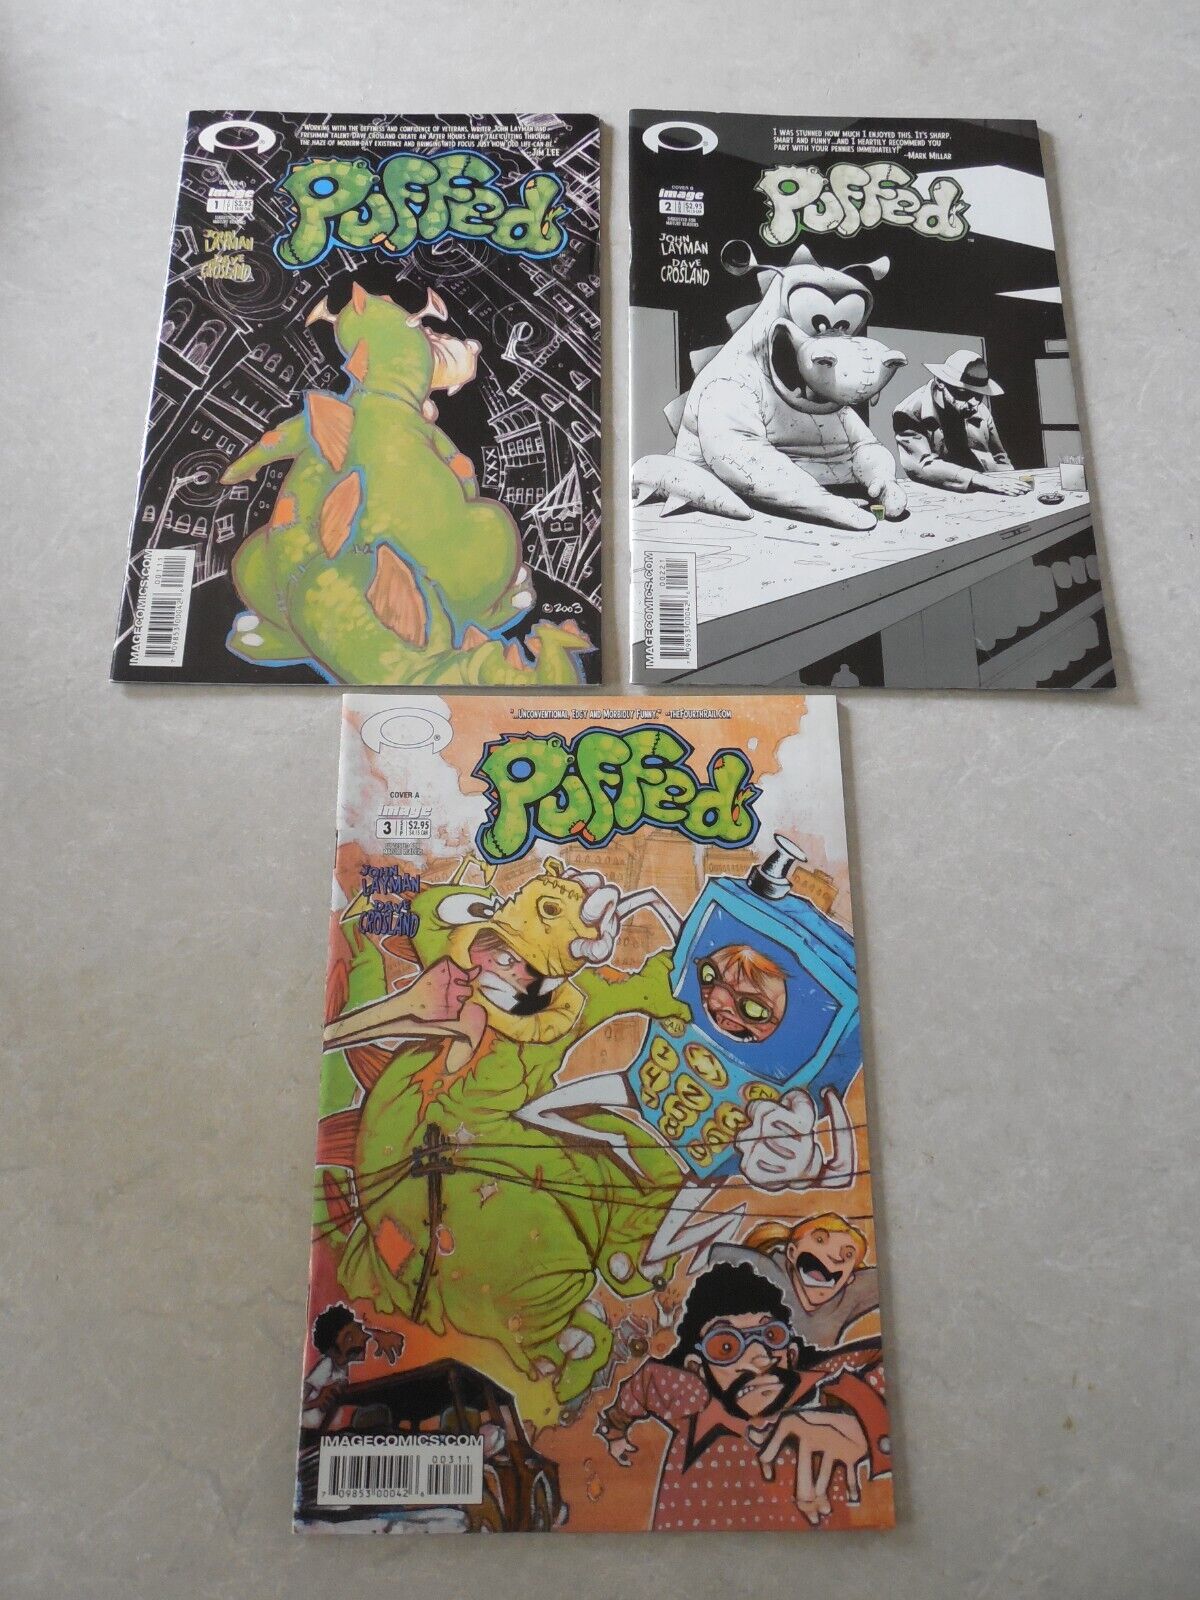 PUFFED #1-3, IMAGE COMICS, 2003, 1ST PRINT, ALL UNREAD 9.4 NM OR BETTER